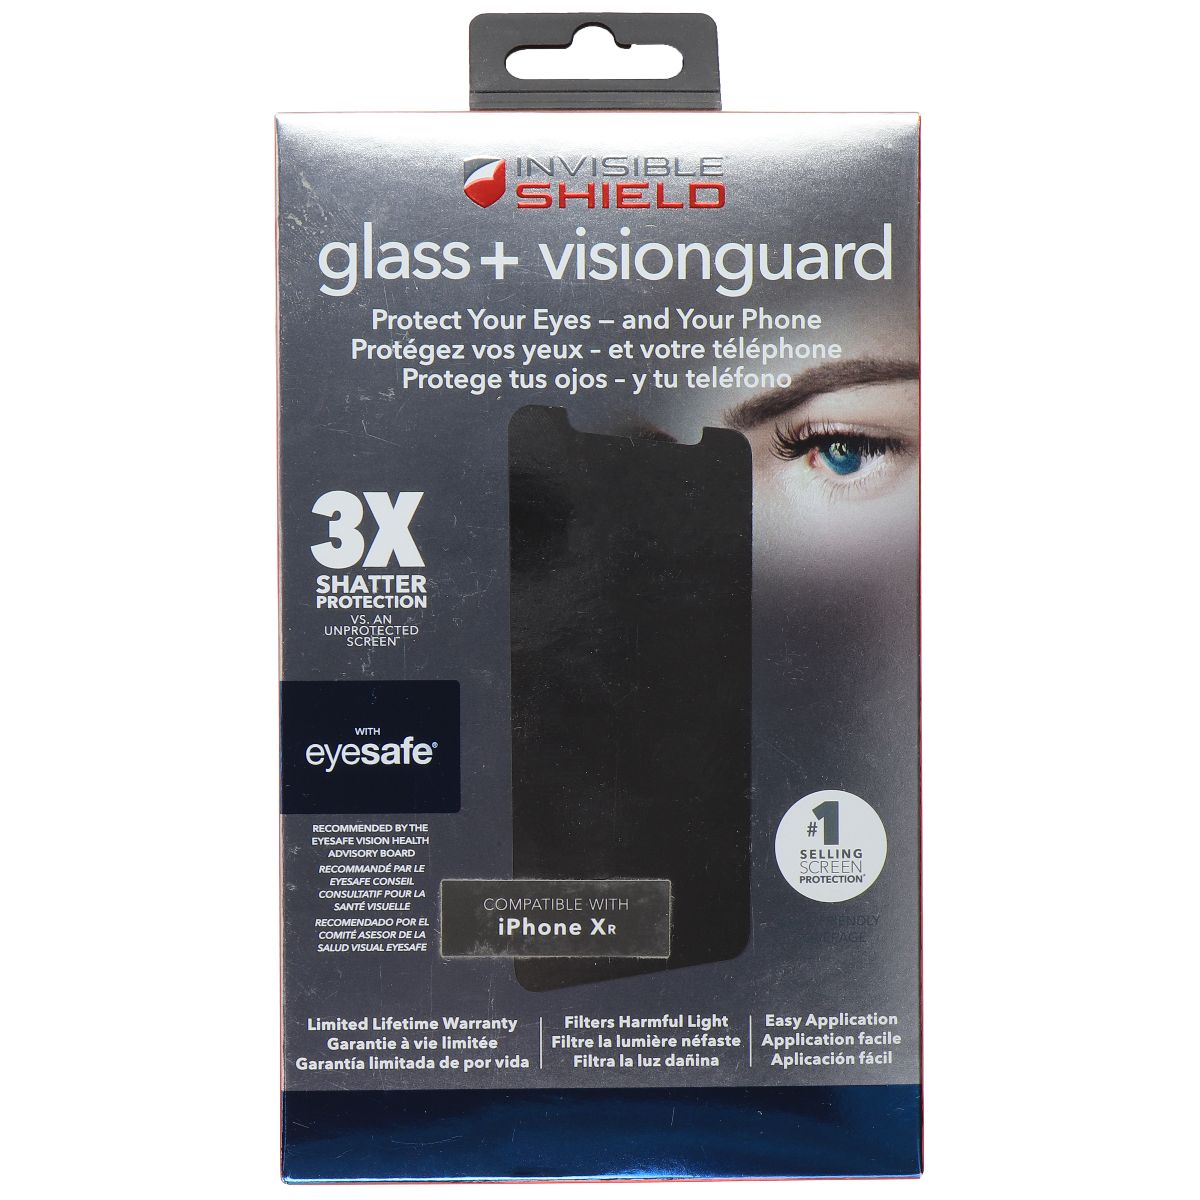 ZAGG InvisibleShield (Glass+ Visionguard) Screen Protector for Apple iPhone XR